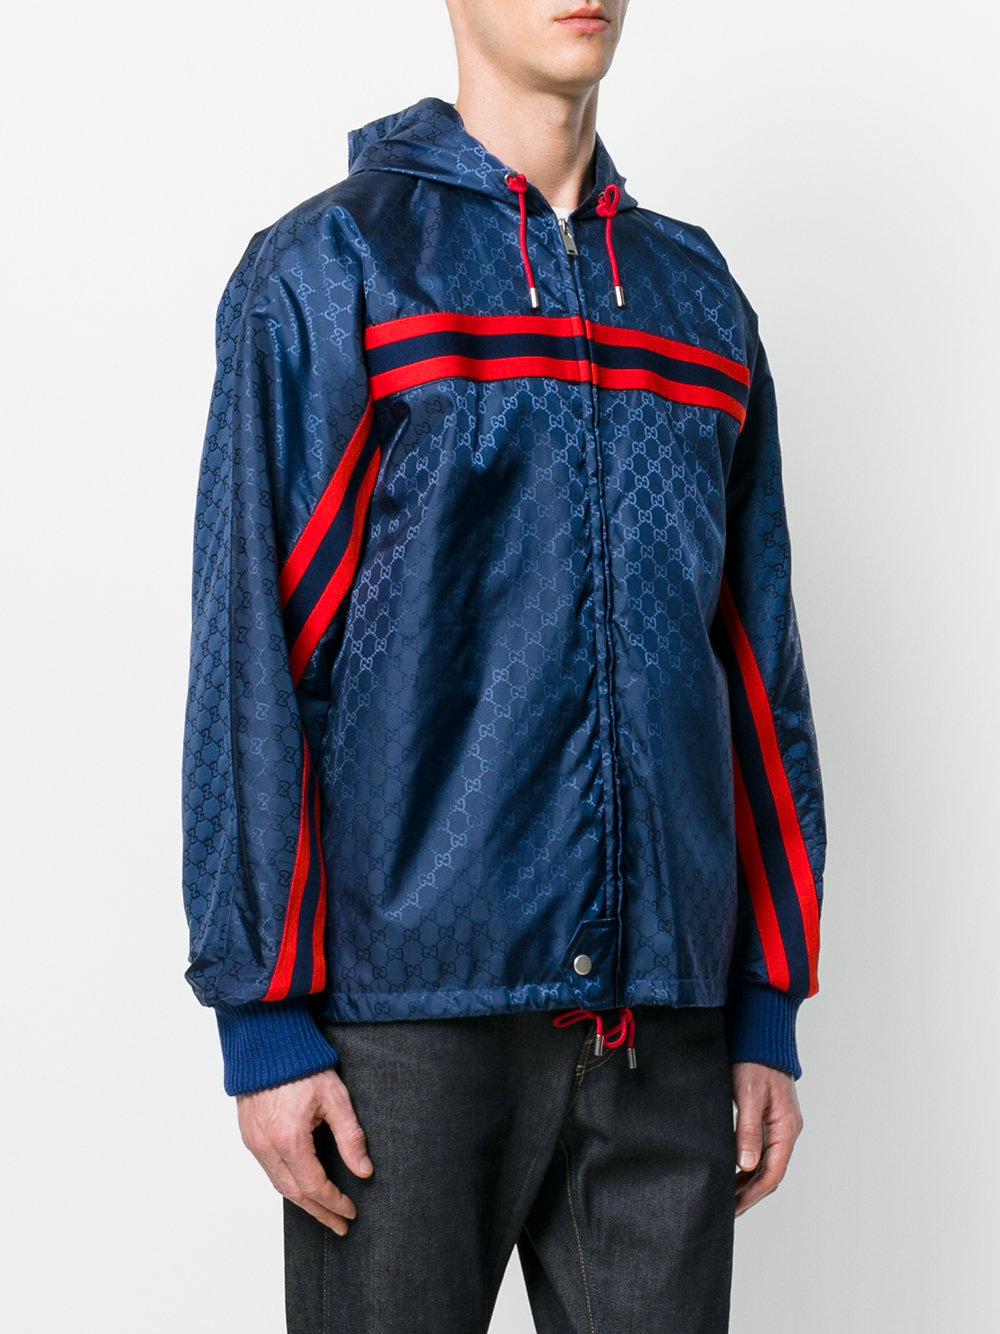 Gucci Monogram Shell Jacket in Blue for Men - Lyst